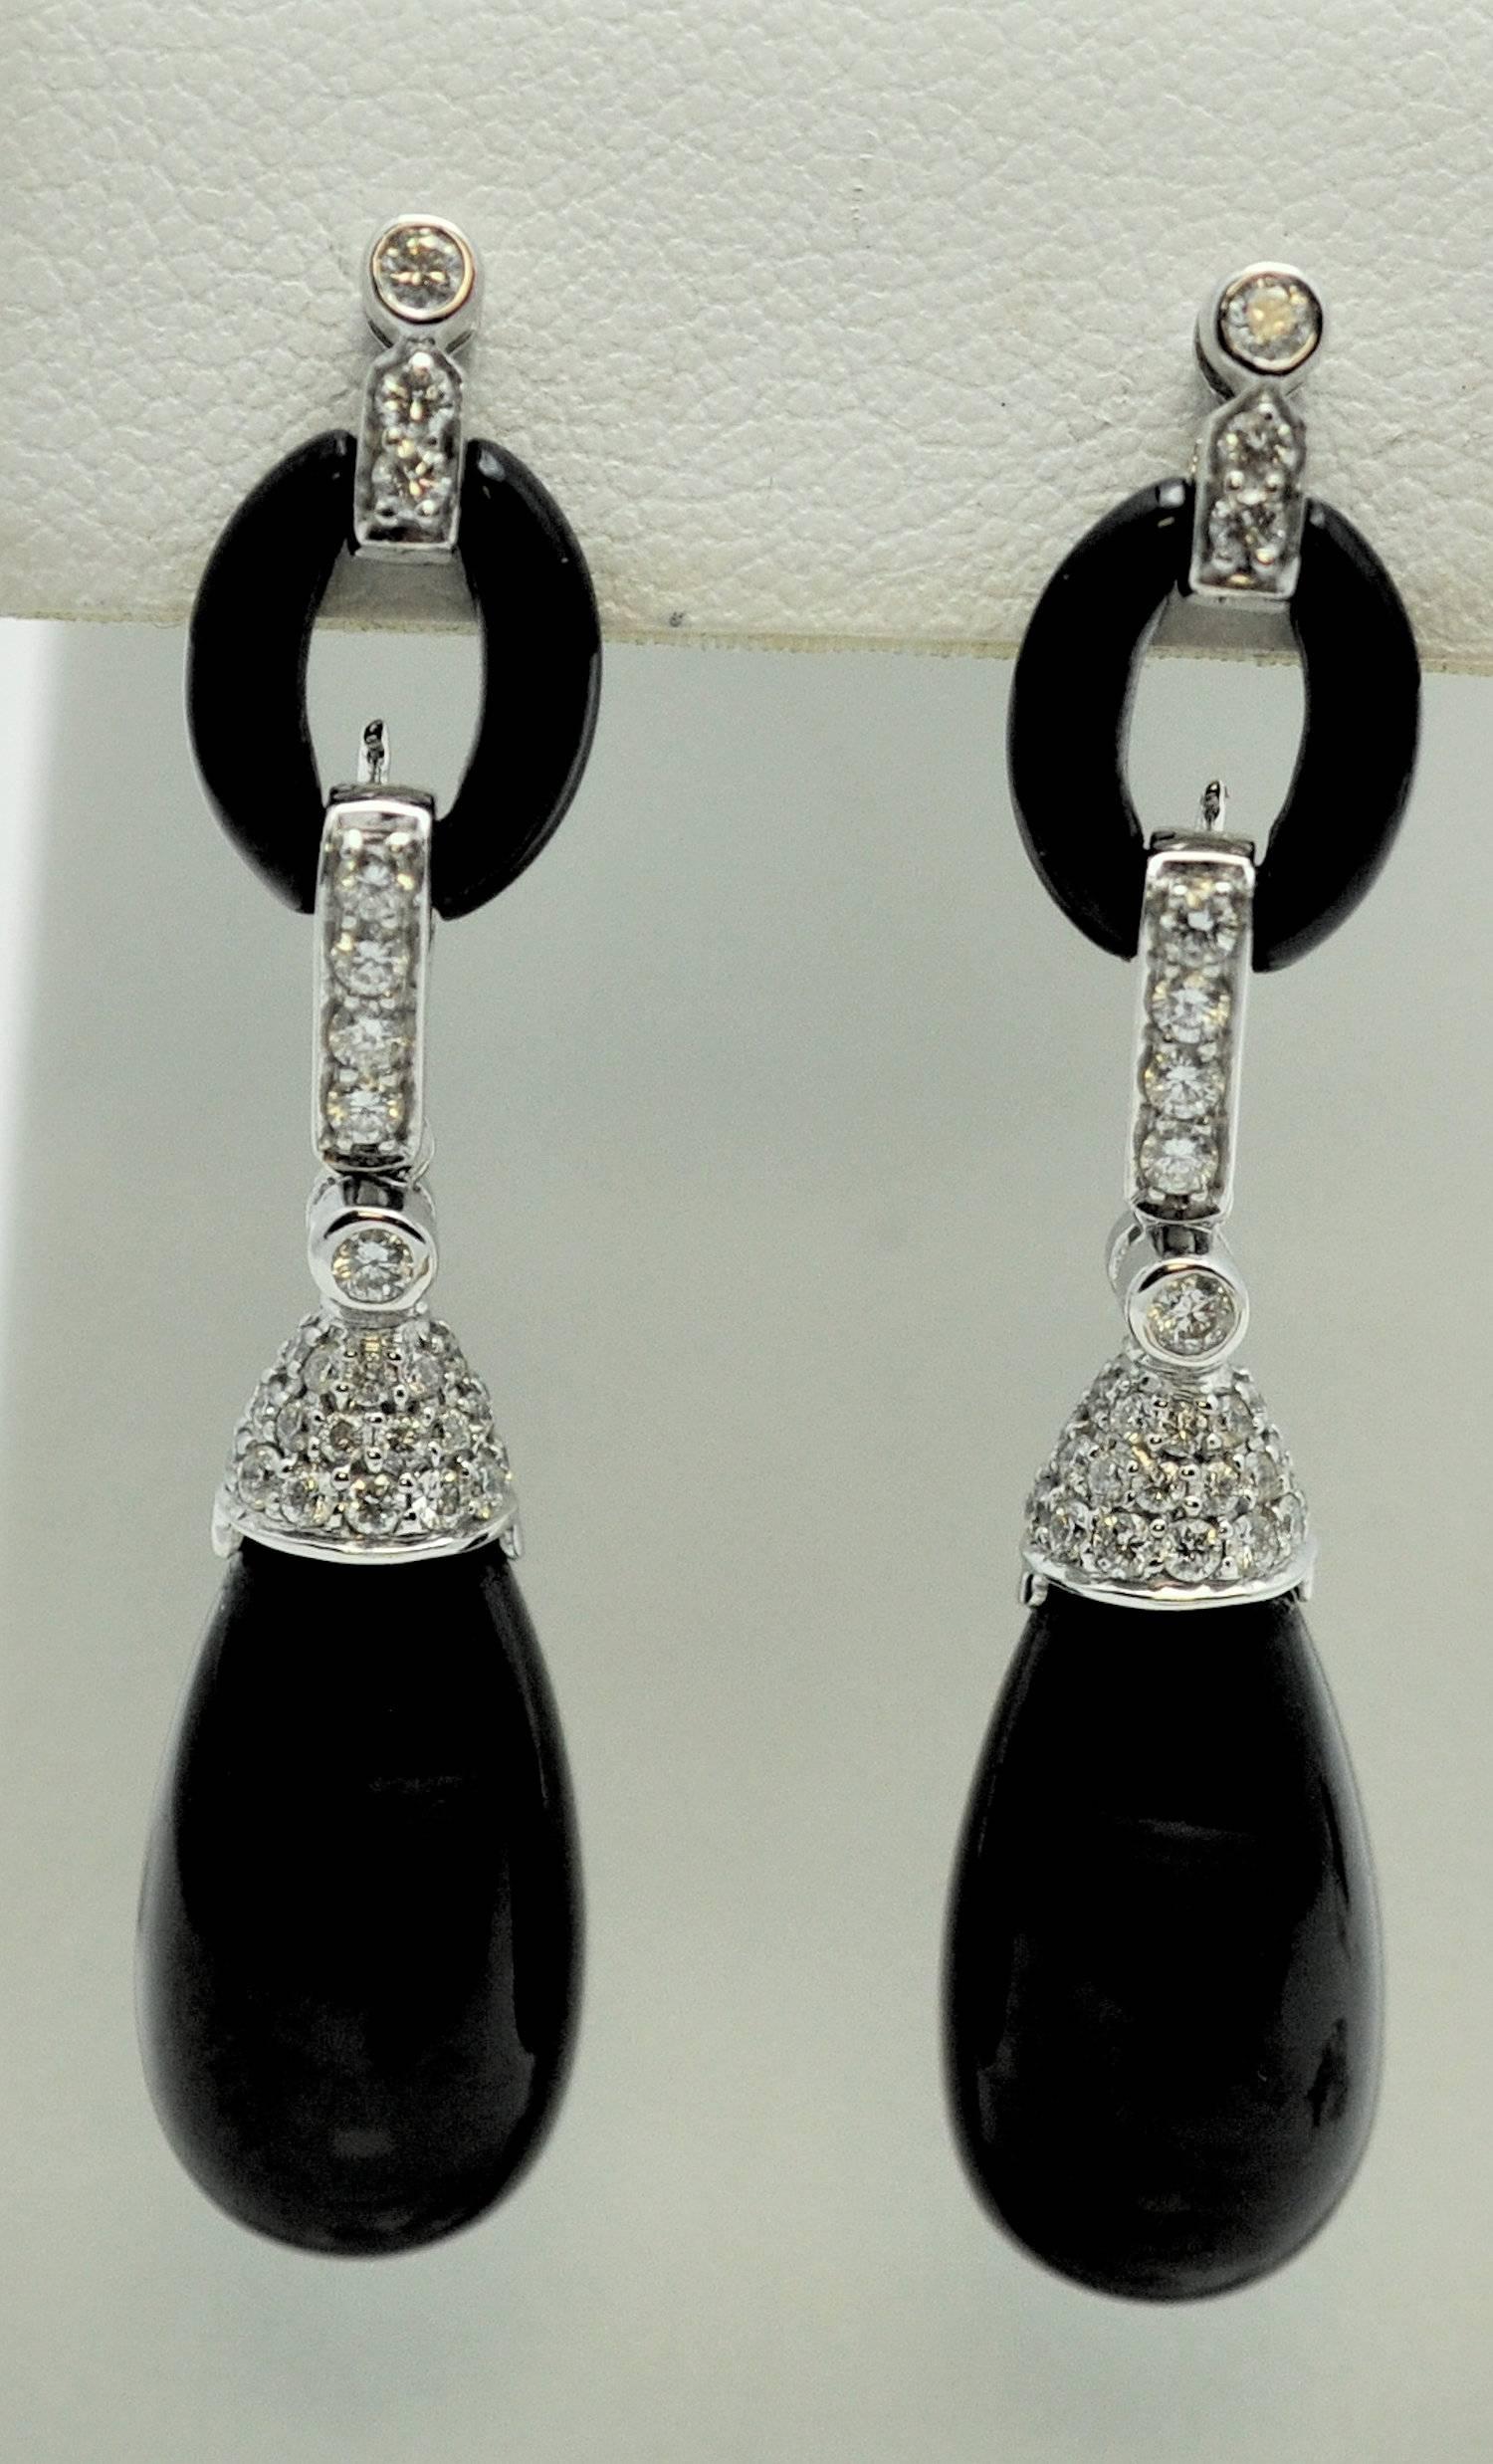 Modern day interpretation of the class Art Deco style that everyone loves. Each section moves with the wearer.  The bottom pendant drop is removable to add other stones if you wish; perhaps a lovely pear shape diamond.  Black onyx teardrop measuring